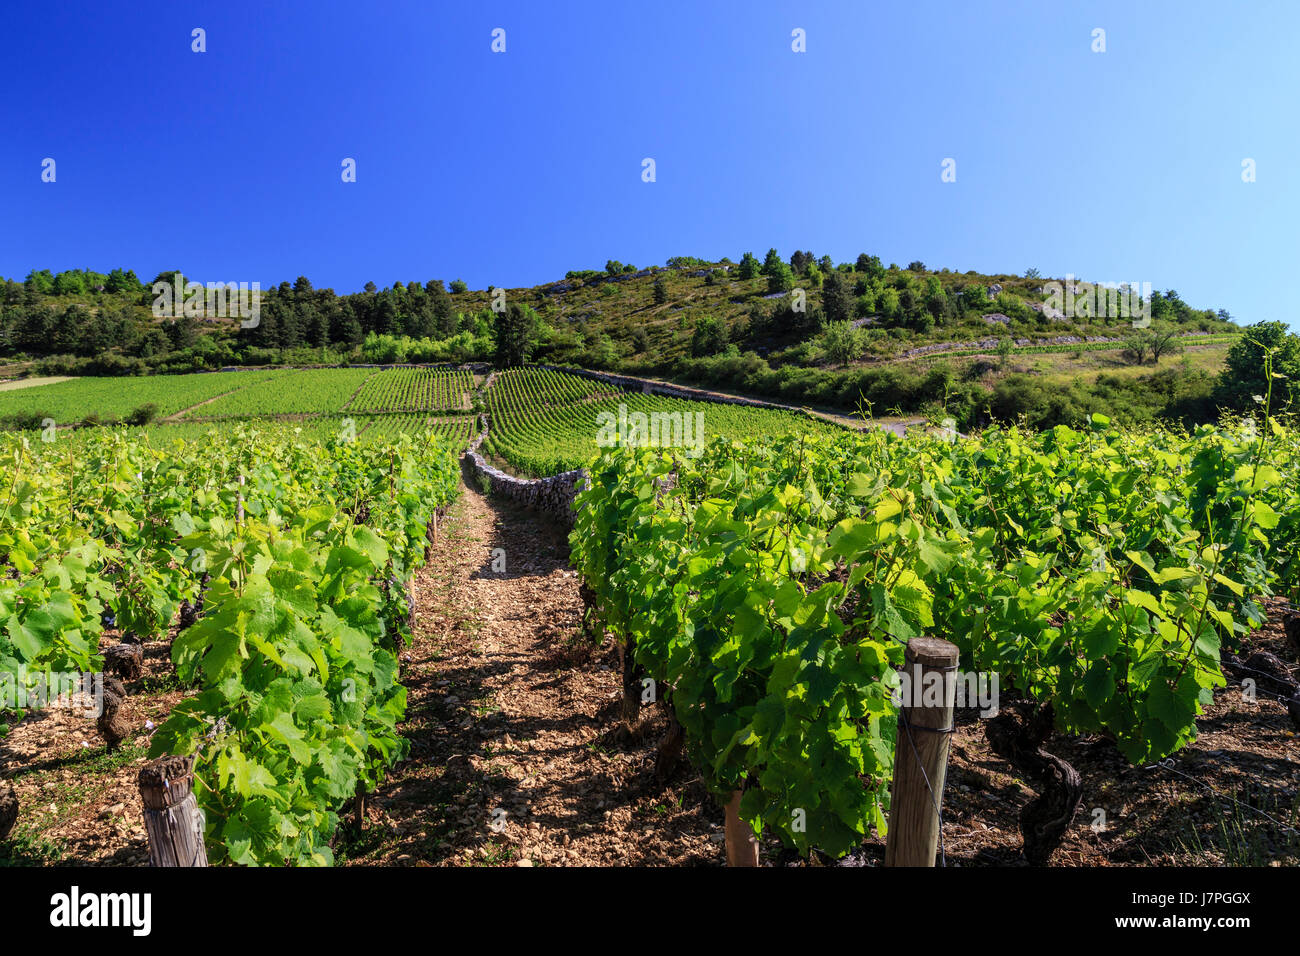 France, Cote d'Or, Burgundy region, Auxey-Duresses, vineyard Stock Photo